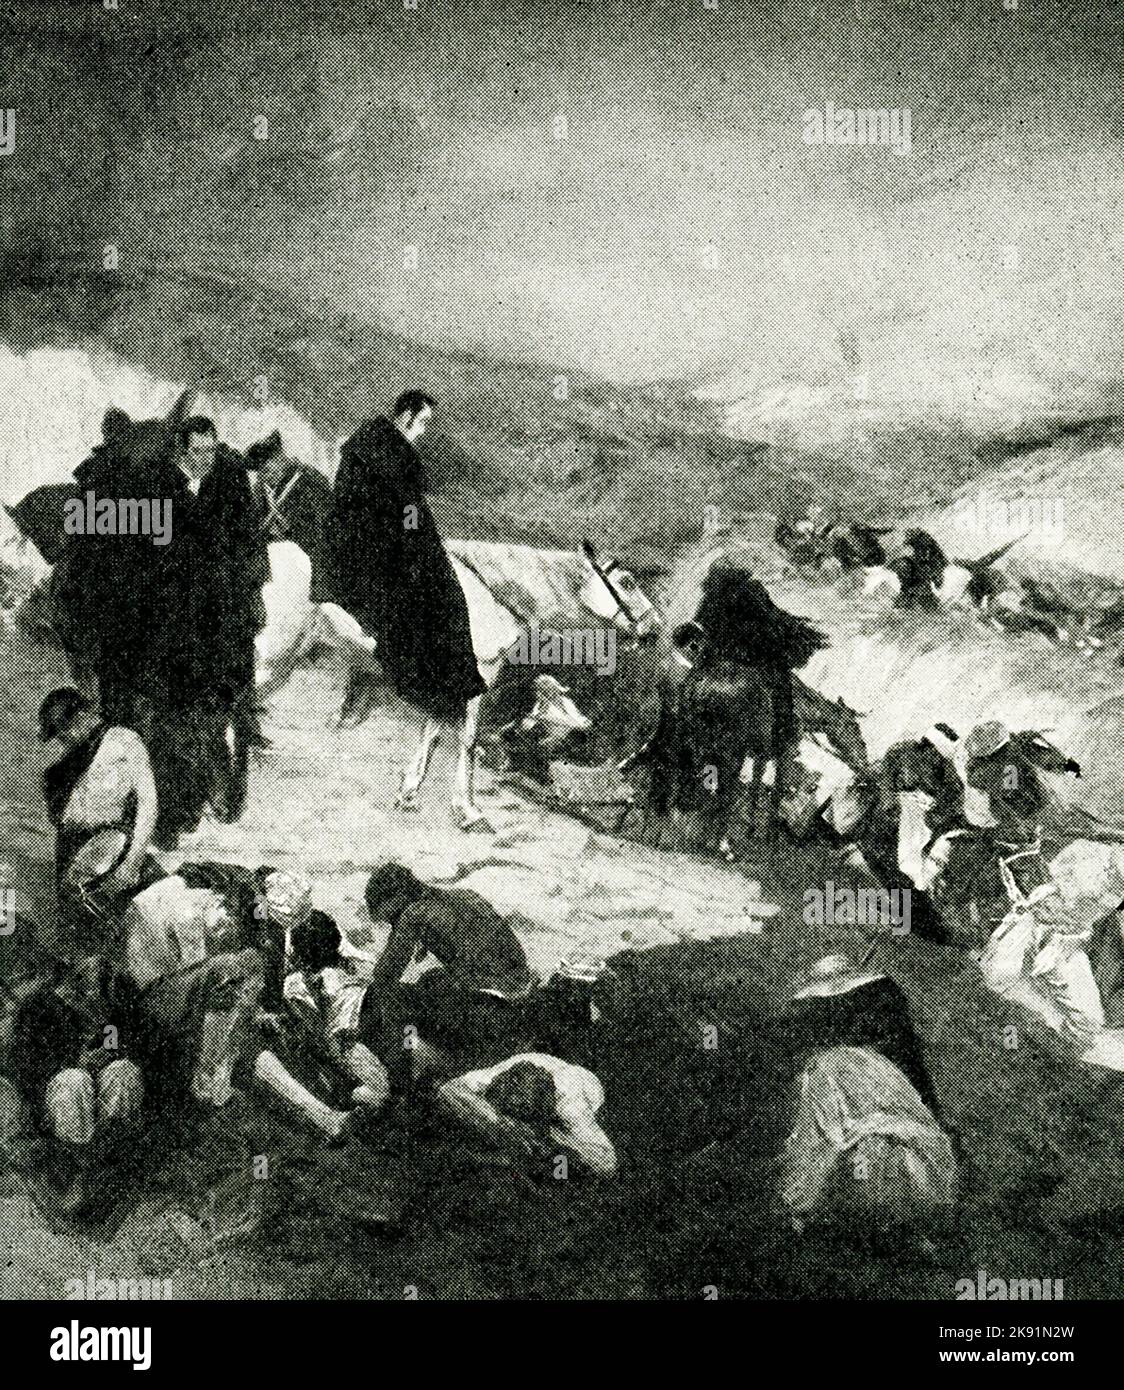 The 1914 caption reads: 'Simon Bolivar crossing the Andes.' Simón Bolívar (1783-1830) was a South American soldier who was instrumental in the continent's revolutions against the Spanish empire. Simón Bolívar, the dashing Liberator, conceived of a brilliant yet seemingly suicidal plan: he would take his 2,000+ man army, cross the mighty Andes in 1819, and hit the Spanish where they were least expecting it: in neighboring New Granada (Colombia), where a small Spanish army held the region unopposed. Stock Photo